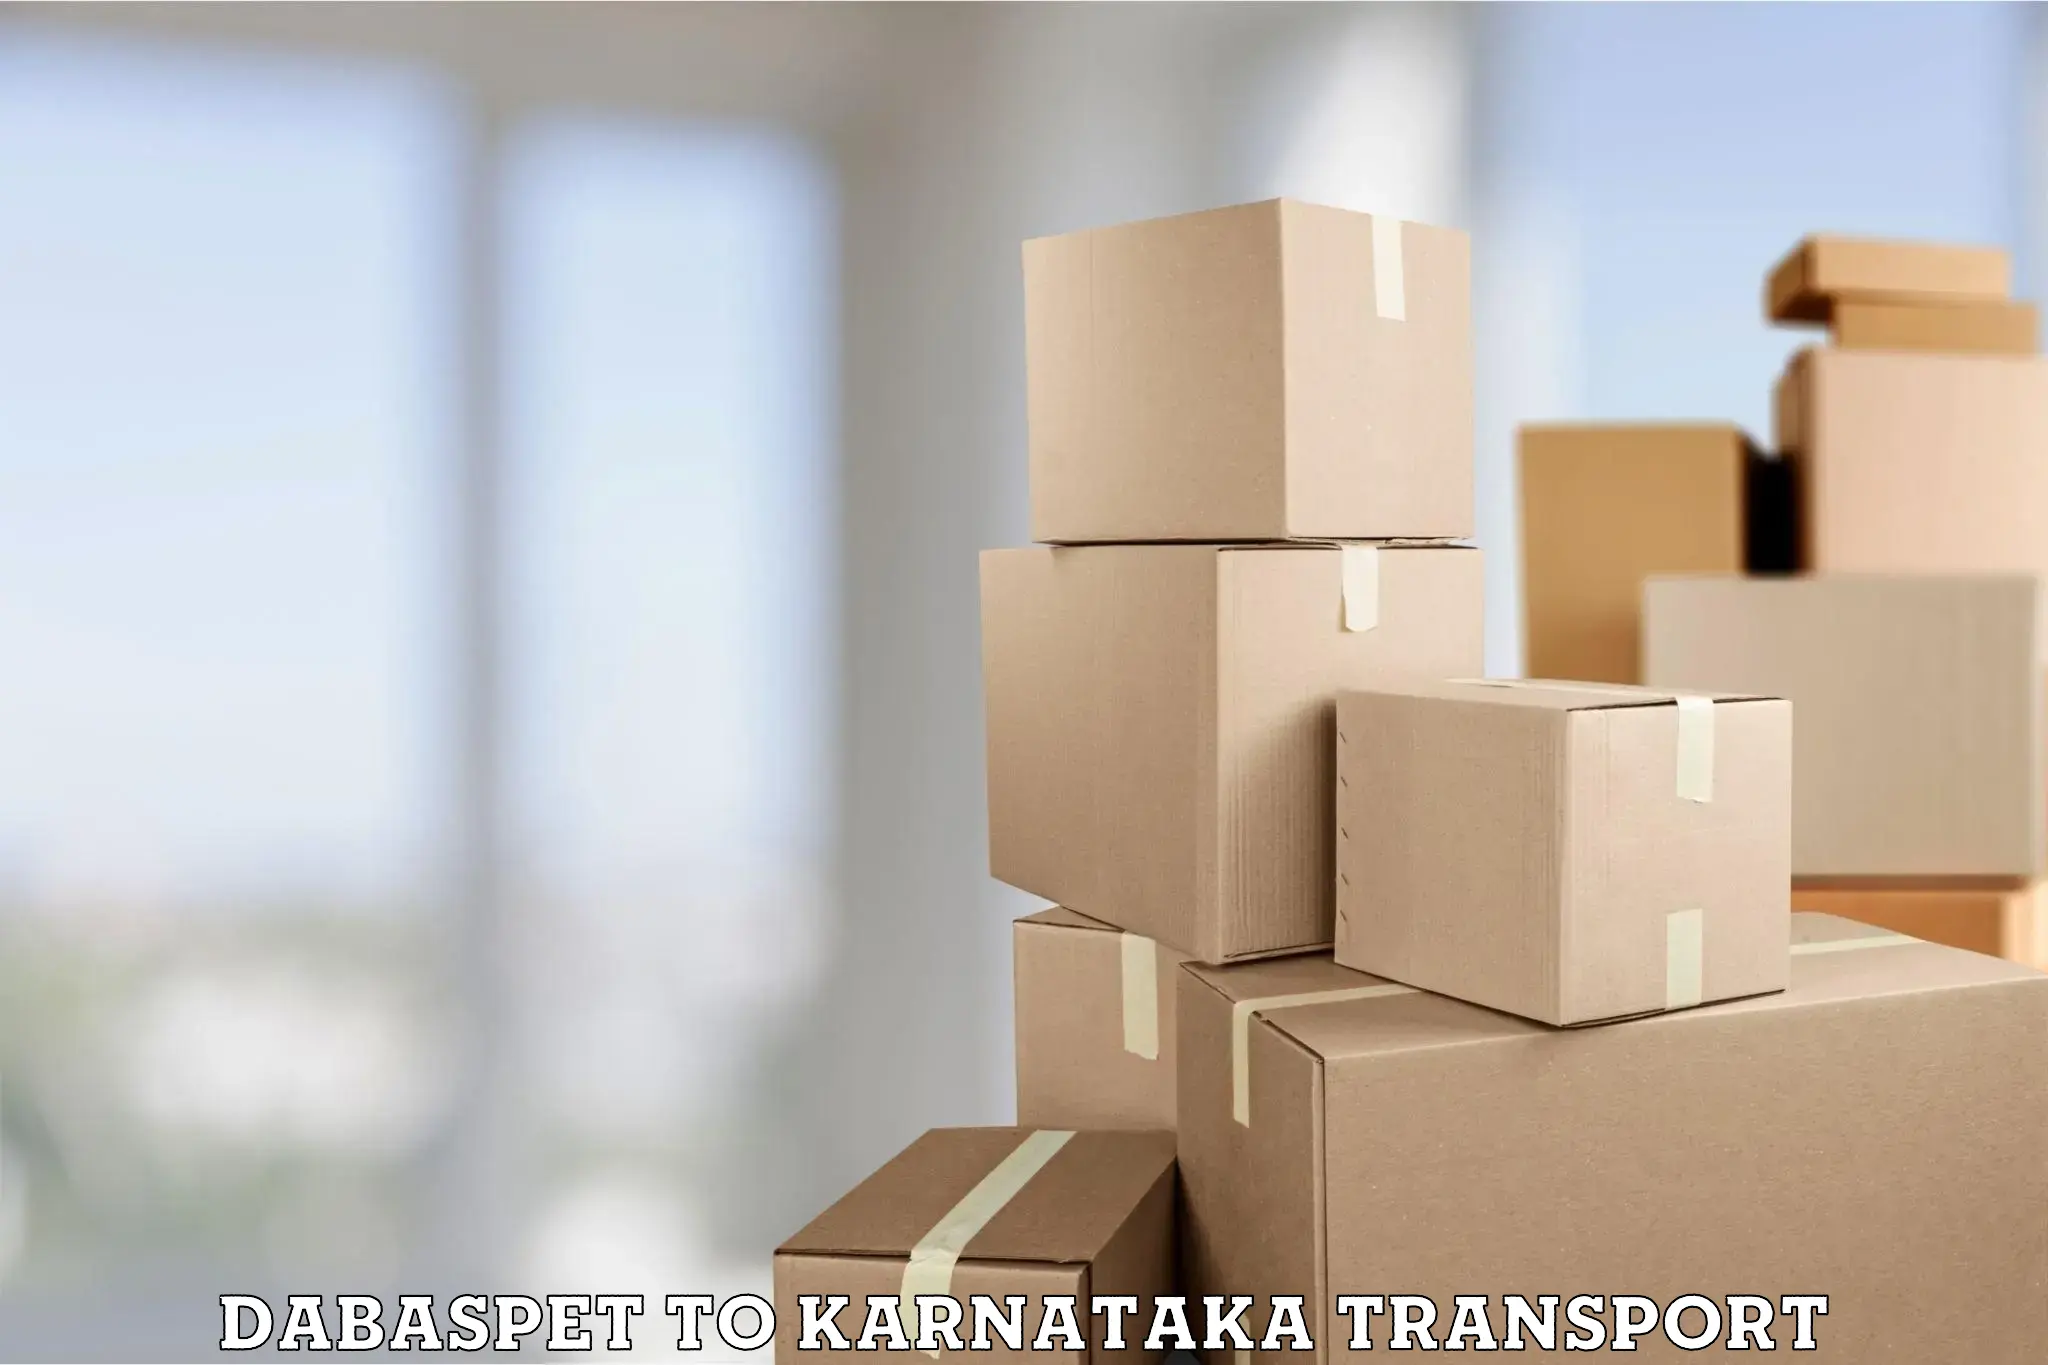 Commercial transport service Dabaspet to Kollegal